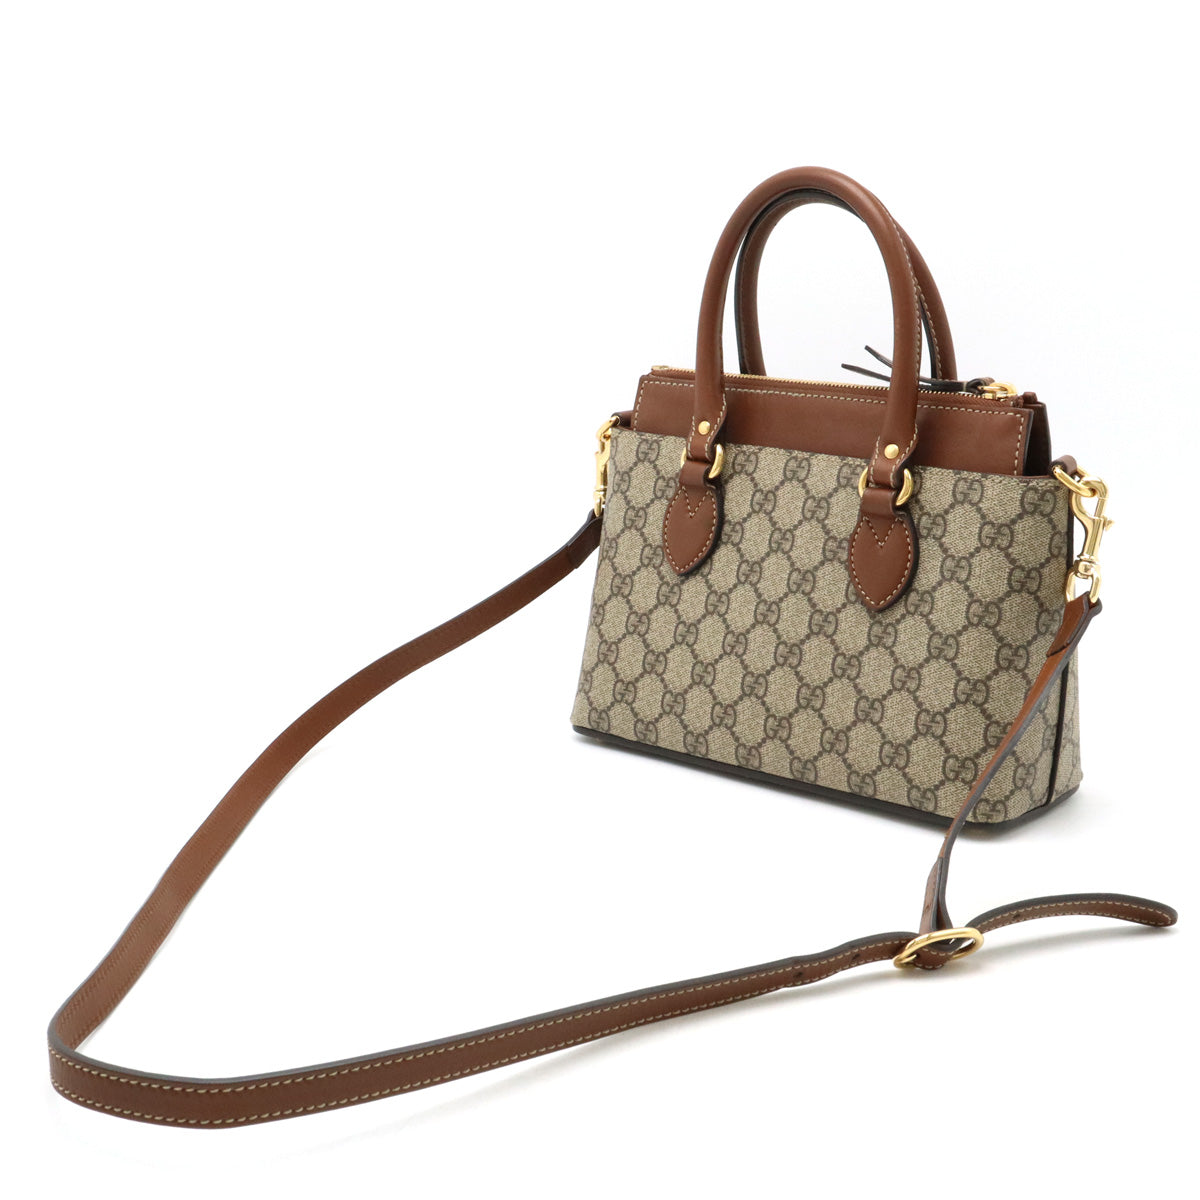 GUCCI Gucci GG Spring Handbags 2WAY Shoulder Bags  PVC Leather Beige Brown Tea Gold  453177